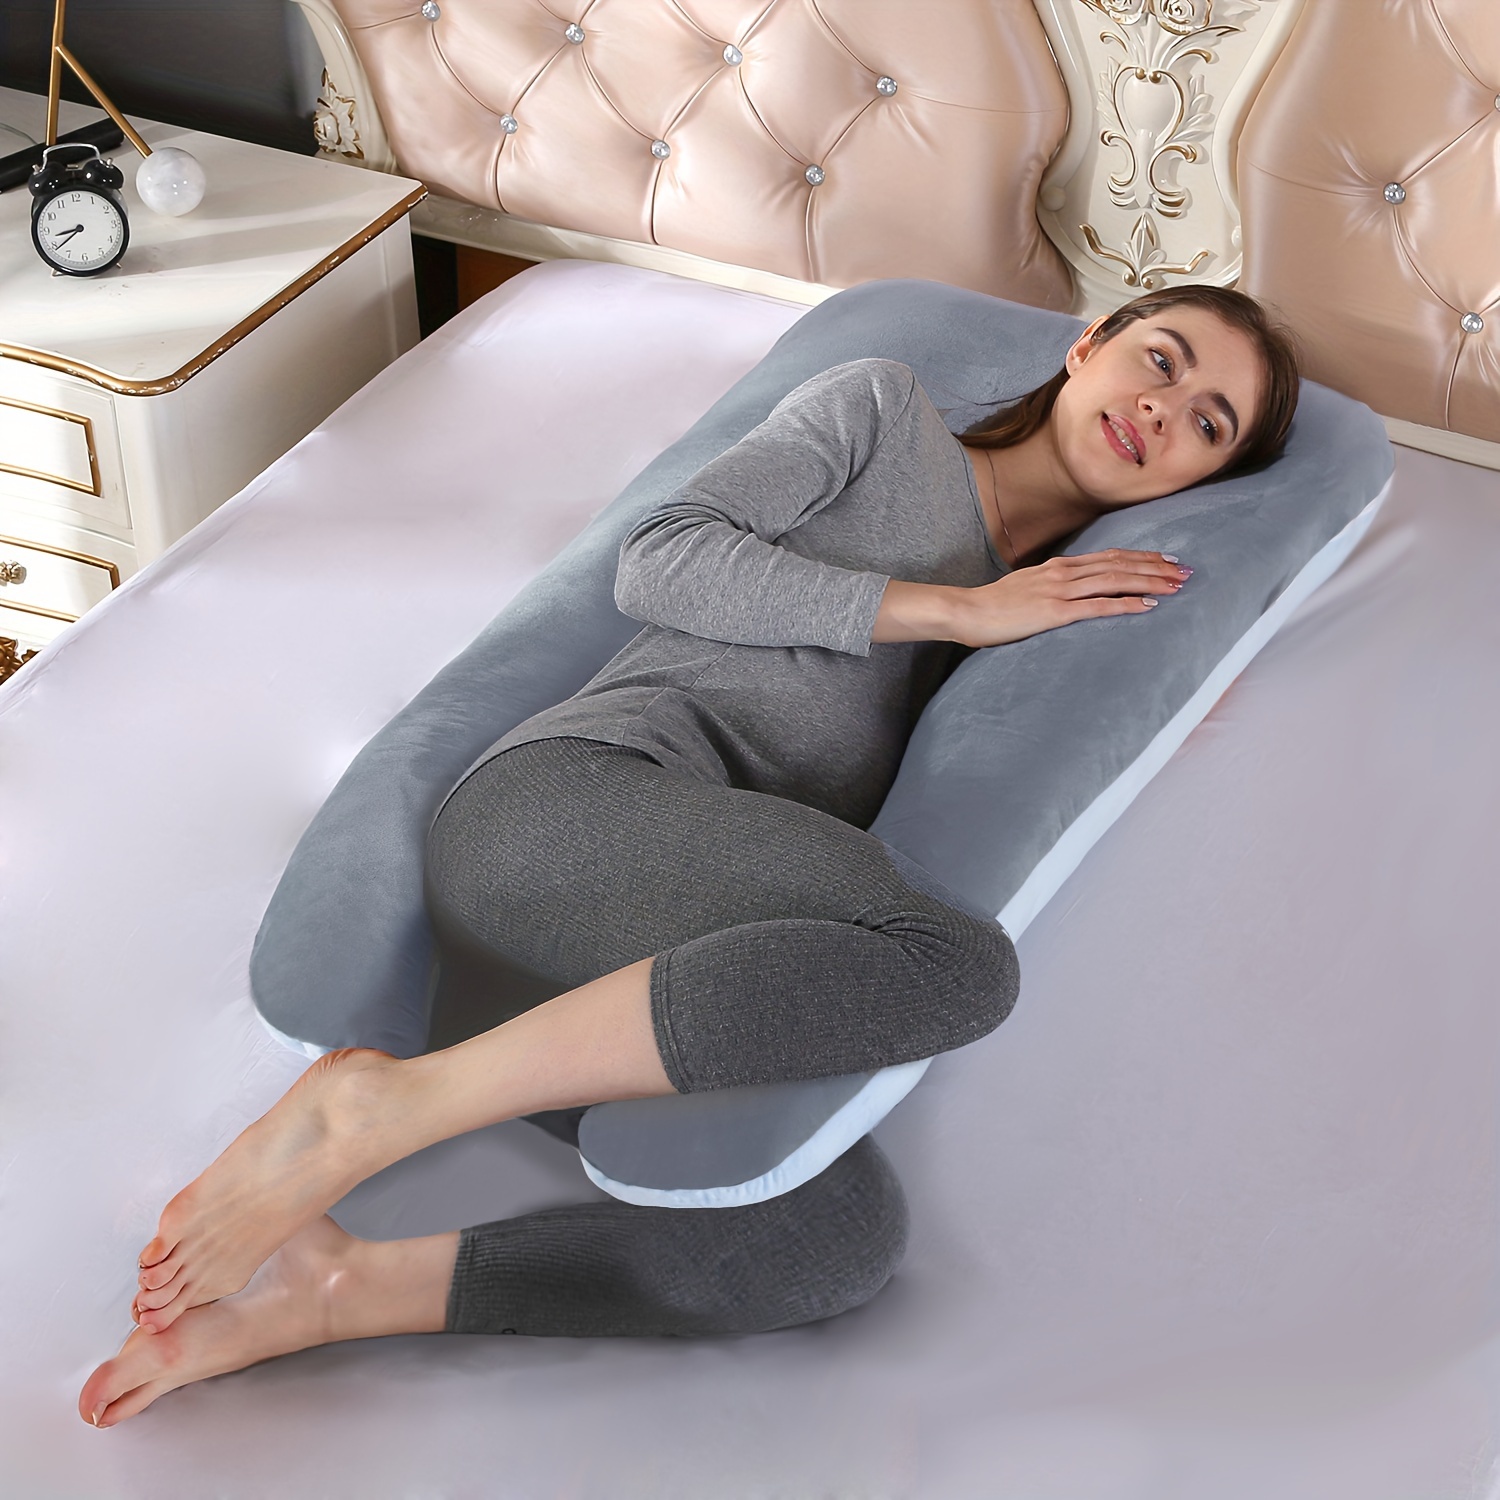  Bespilow Soft Leg Pillow for Side Sleepers,Comfortable